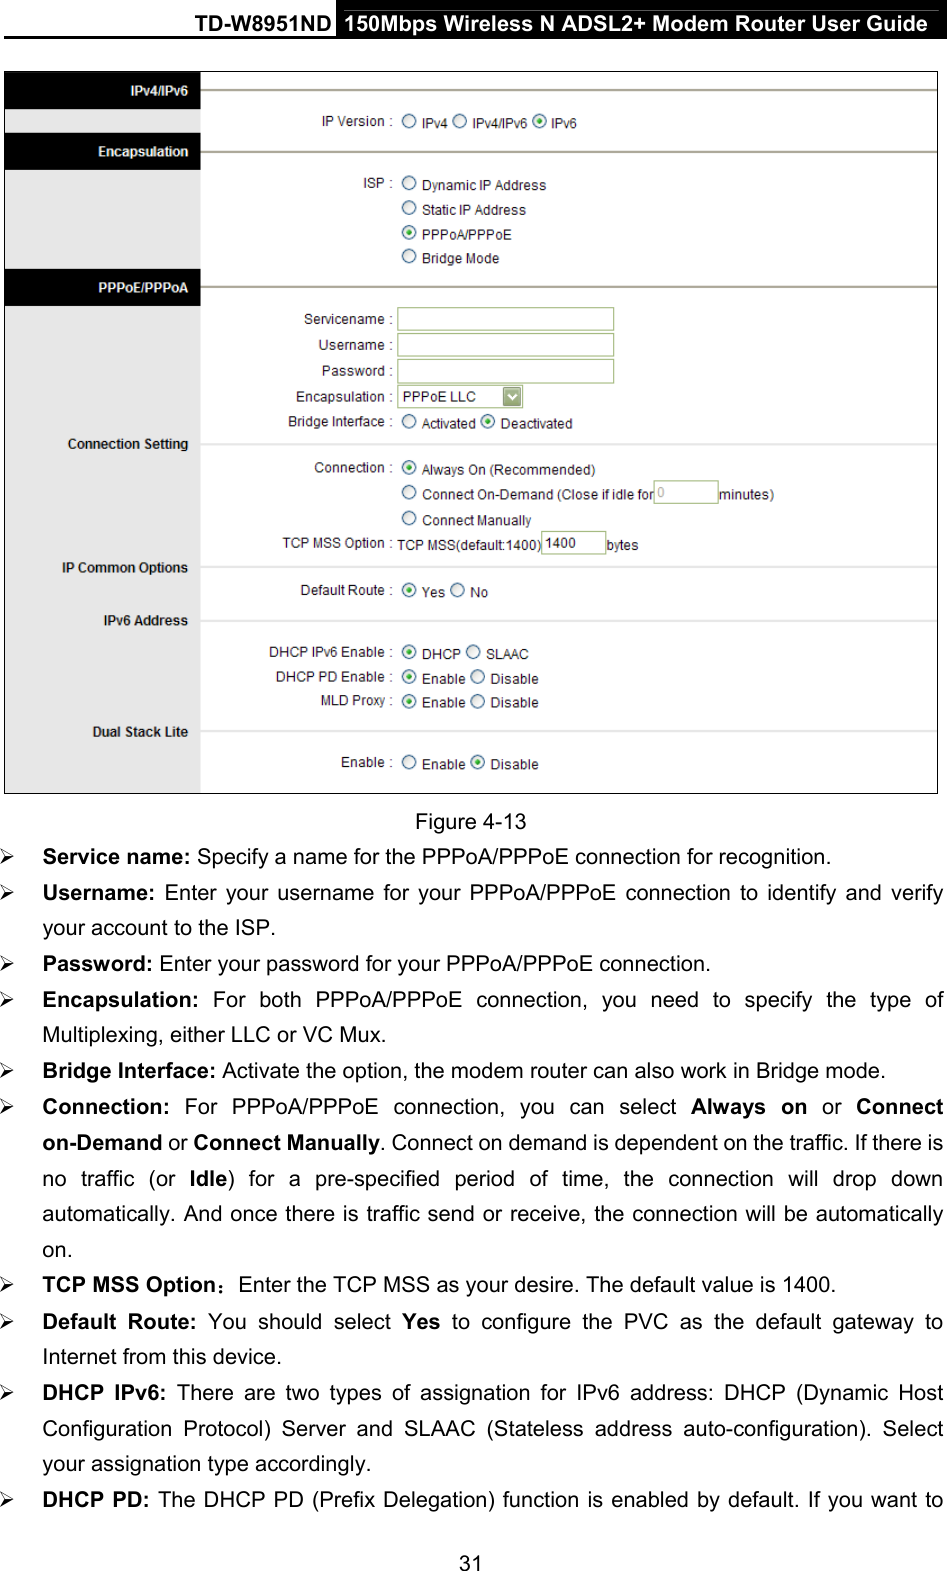 TD-W8951ND  150Mbps Wireless N ADSL2+ Modem Router User Guide  Figure 4-13  Service name: Specify a name for the PPPoA/PPPoE connection for recognition.    Username:  Enter your username for your PPPoA/PPPoE connection to identify and verify your account to the ISP.  Password: Enter your password for your PPPoA/PPPoE connection.  Encapsulation:  For both PPPoA/PPPoE connection, you need to specify the type of Multiplexing, either LLC or VC Mux.  Bridge Interface: Activate the option, the modem router can also work in Bridge mode.  Connection: For PPPoA/PPPoE connection, you can select Always on or Connect on-Demand or Connect Manually. Connect on demand is dependent on the traffic. If there is no traffic (or Idle) for a pre-specified period of time, the connection will drop down automatically. And once there is traffic send or receive, the connection will be automatically on.  TCP MSS Option：Enter the TCP MSS as your desire. The default value is 1400.  Default Route: You should select Yes to configure the PVC as the default gateway to Internet from this device.  DHCP IPv6: There are two types of assignation for IPv6 address: DHCP (Dynamic Host Configuration Protocol) Server and SLAAC (Stateless address auto-configuration). Select your assignation type accordingly.  DHCP PD: The DHCP PD (Prefix Delegation) function is enabled by default. If you want to 31 